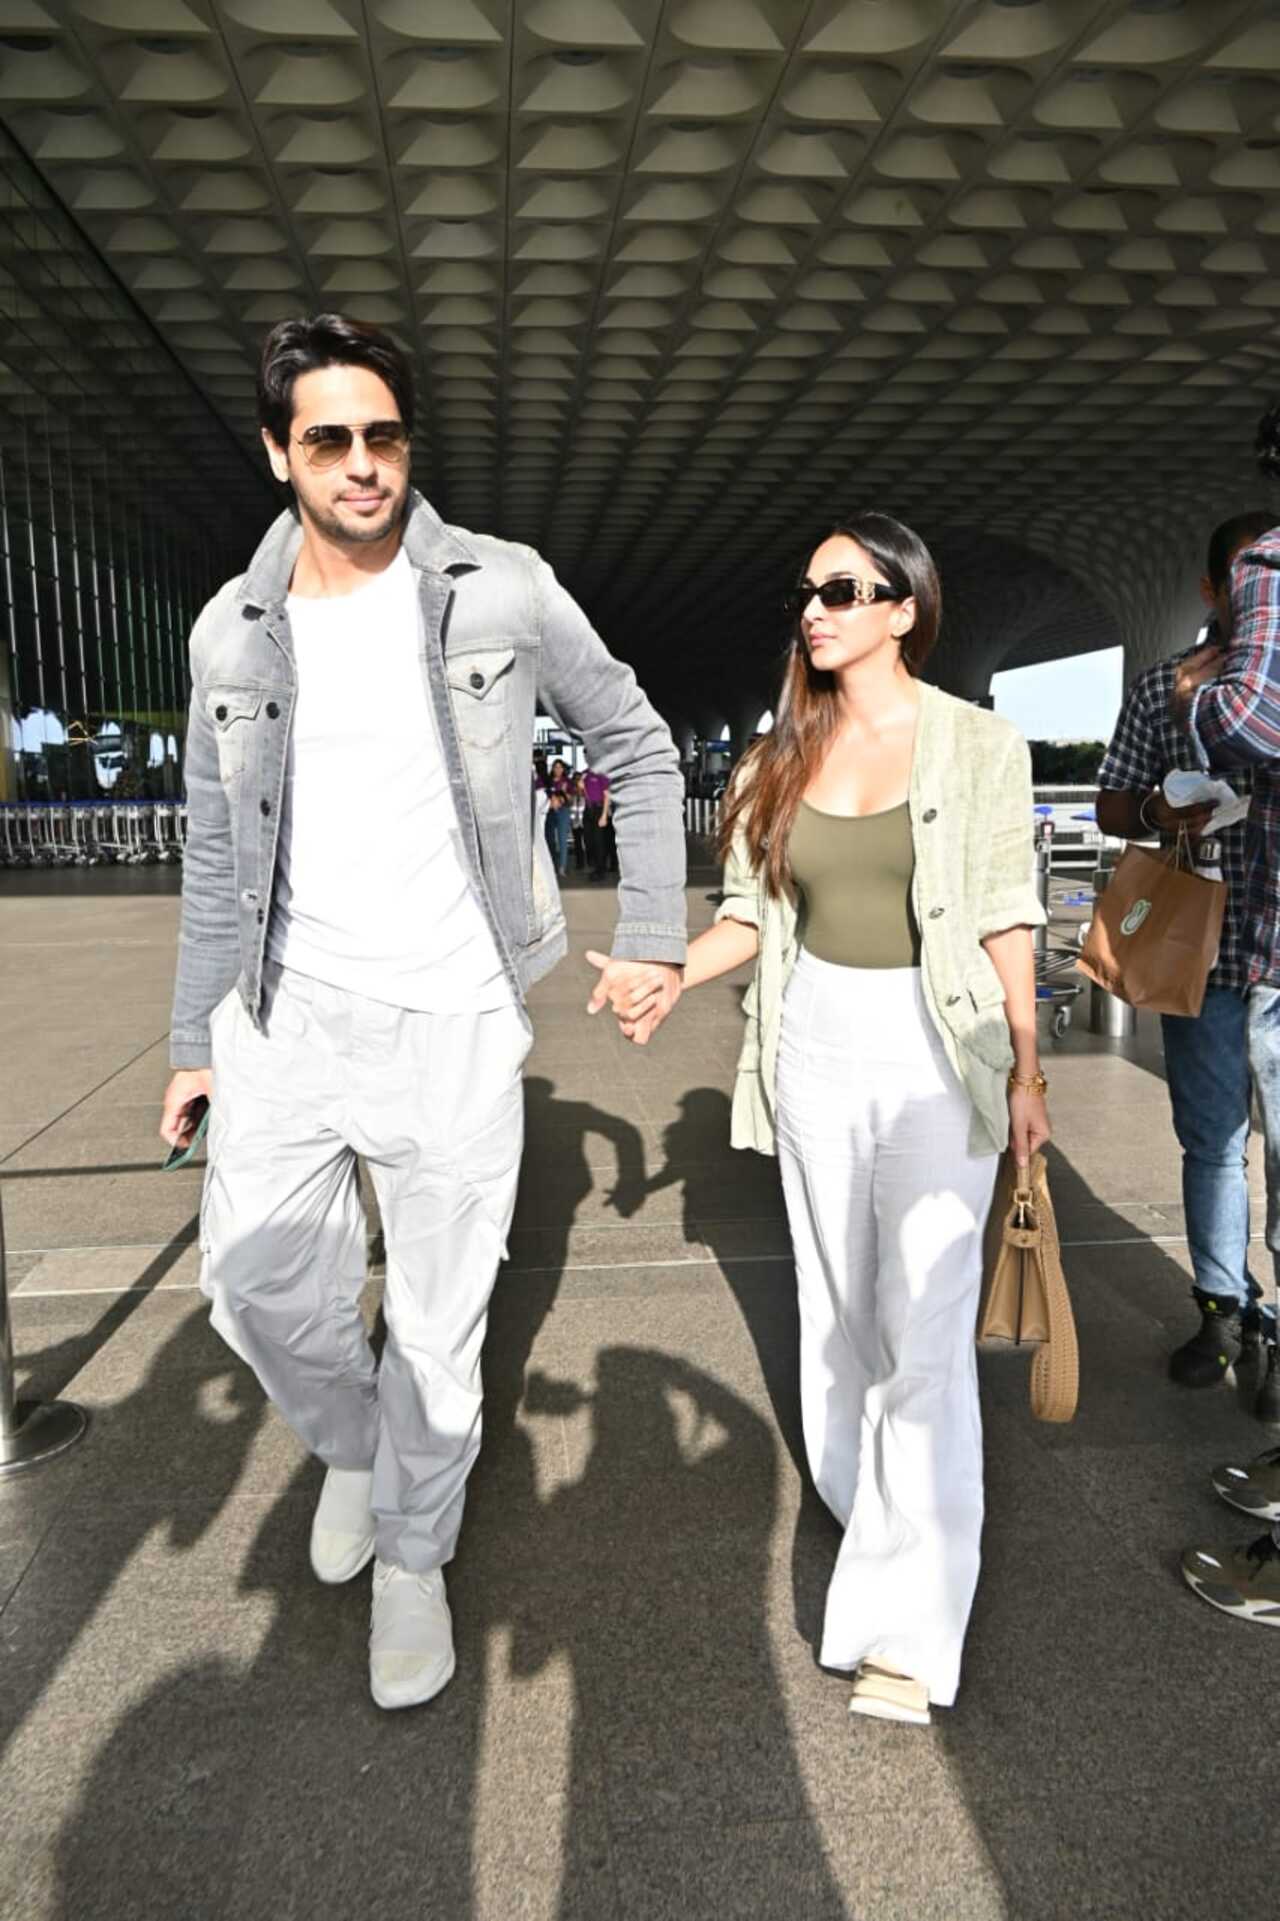 Sidharth Malhotra and Kiara Advani jetted off for yet another vacation. They were at the airport this morning